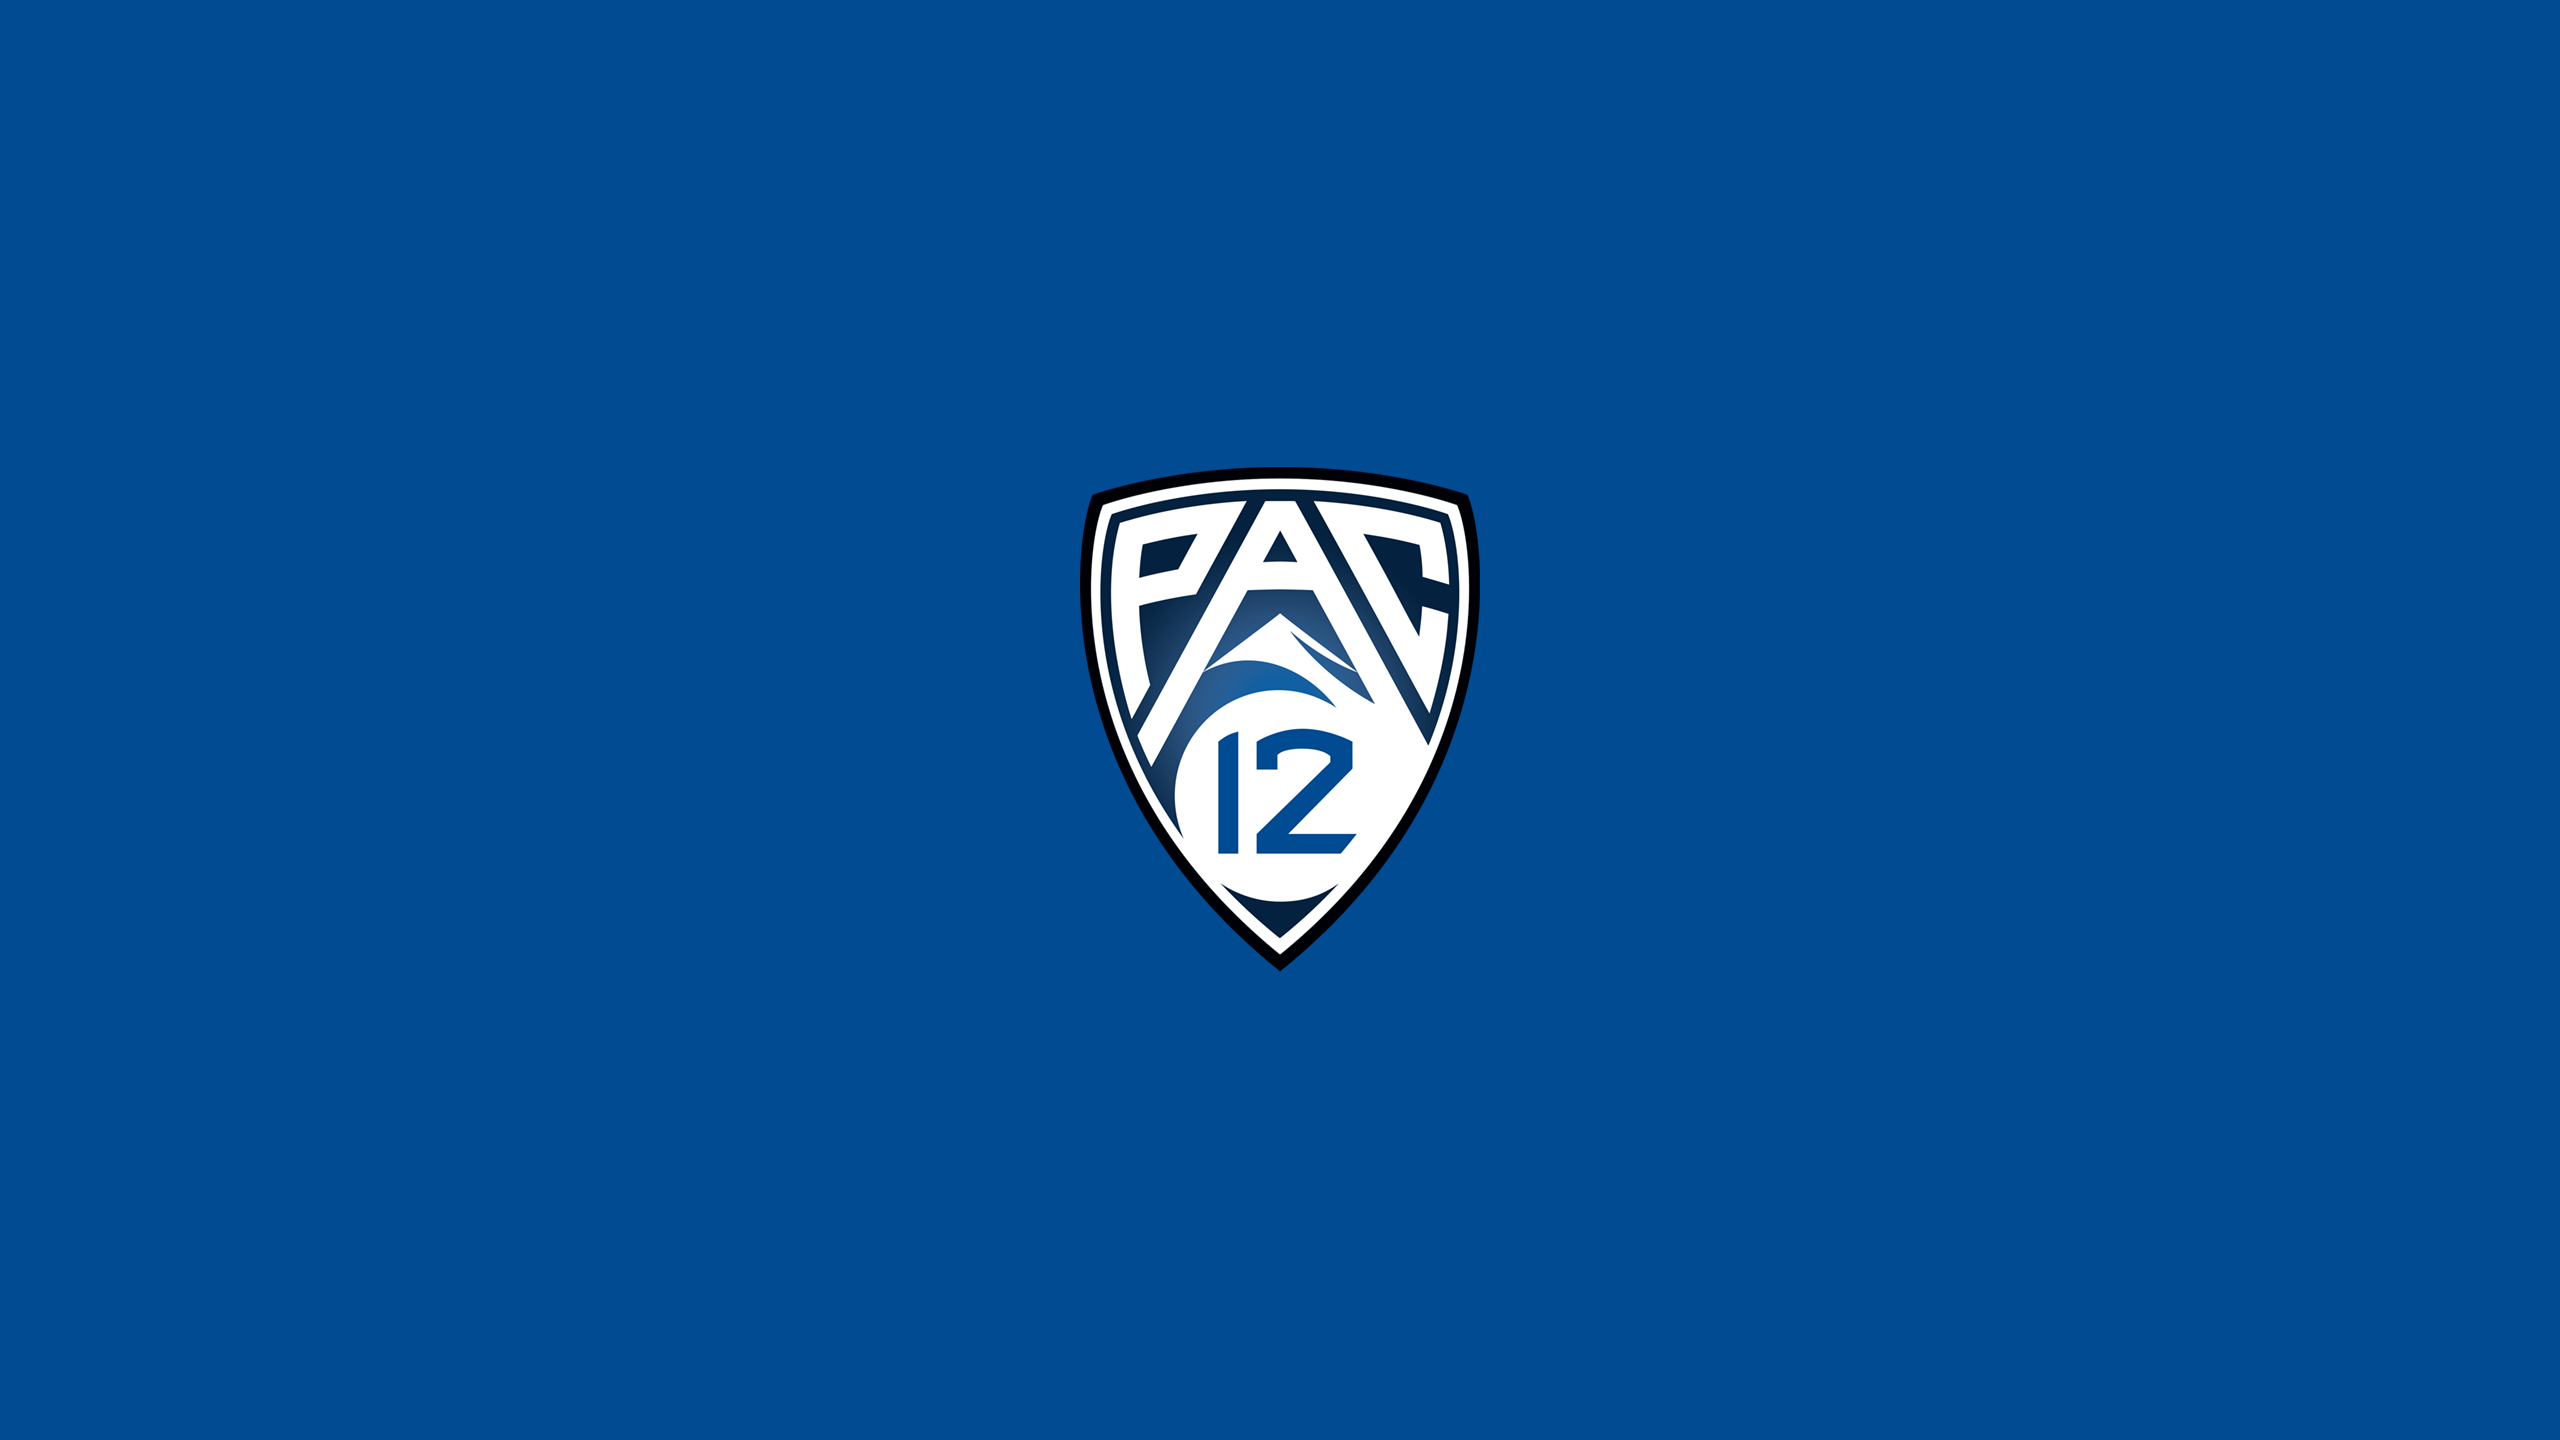 Pac 12 Conference Basketball - NCAAB - Square Bettor